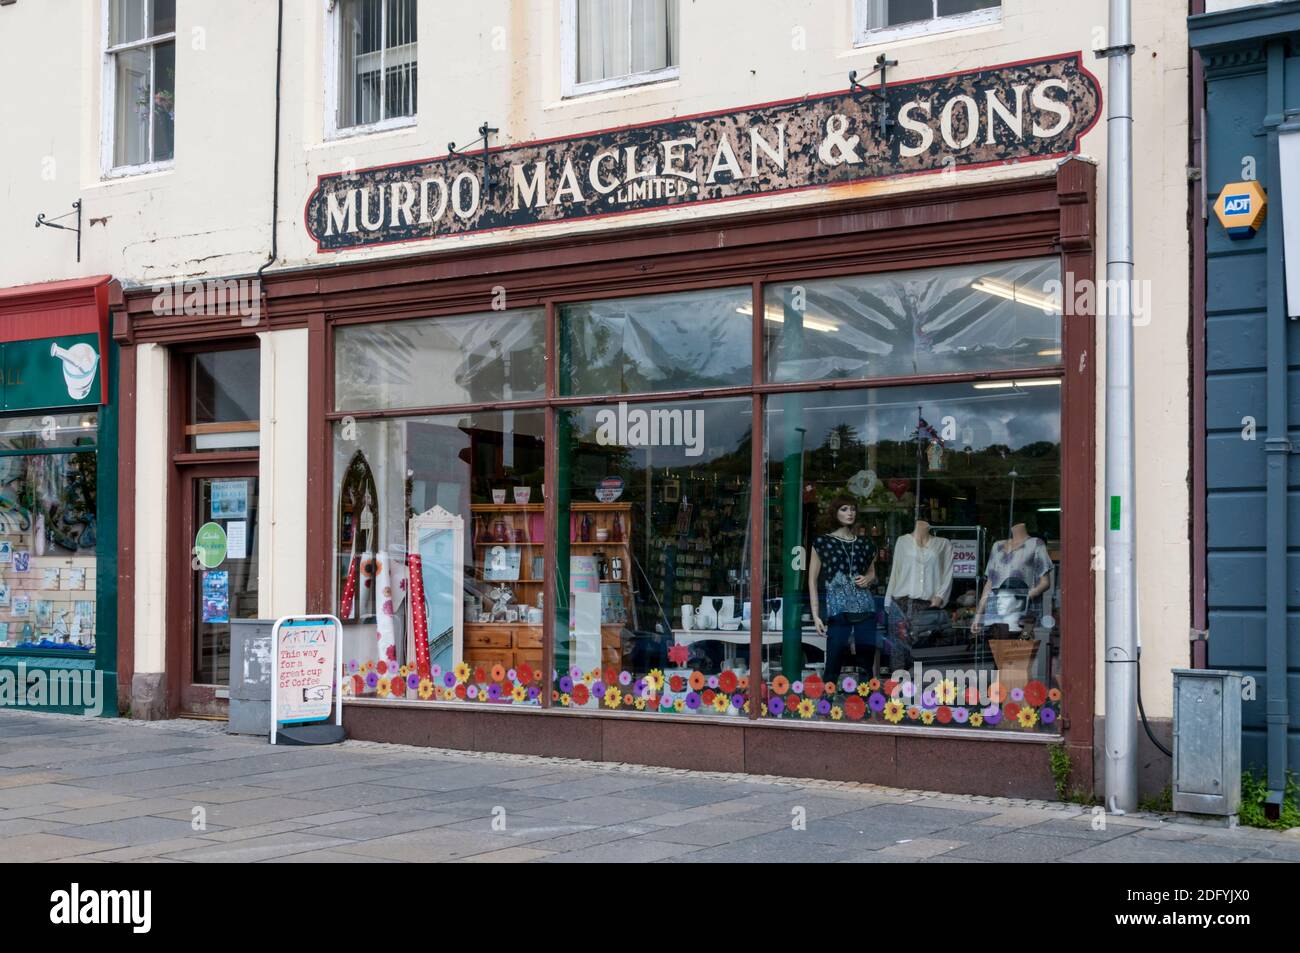 Murdo Maclean & Sons Limited shop in Stornoway on the island of Lewis in the Outer Hebrides. Stock Photo